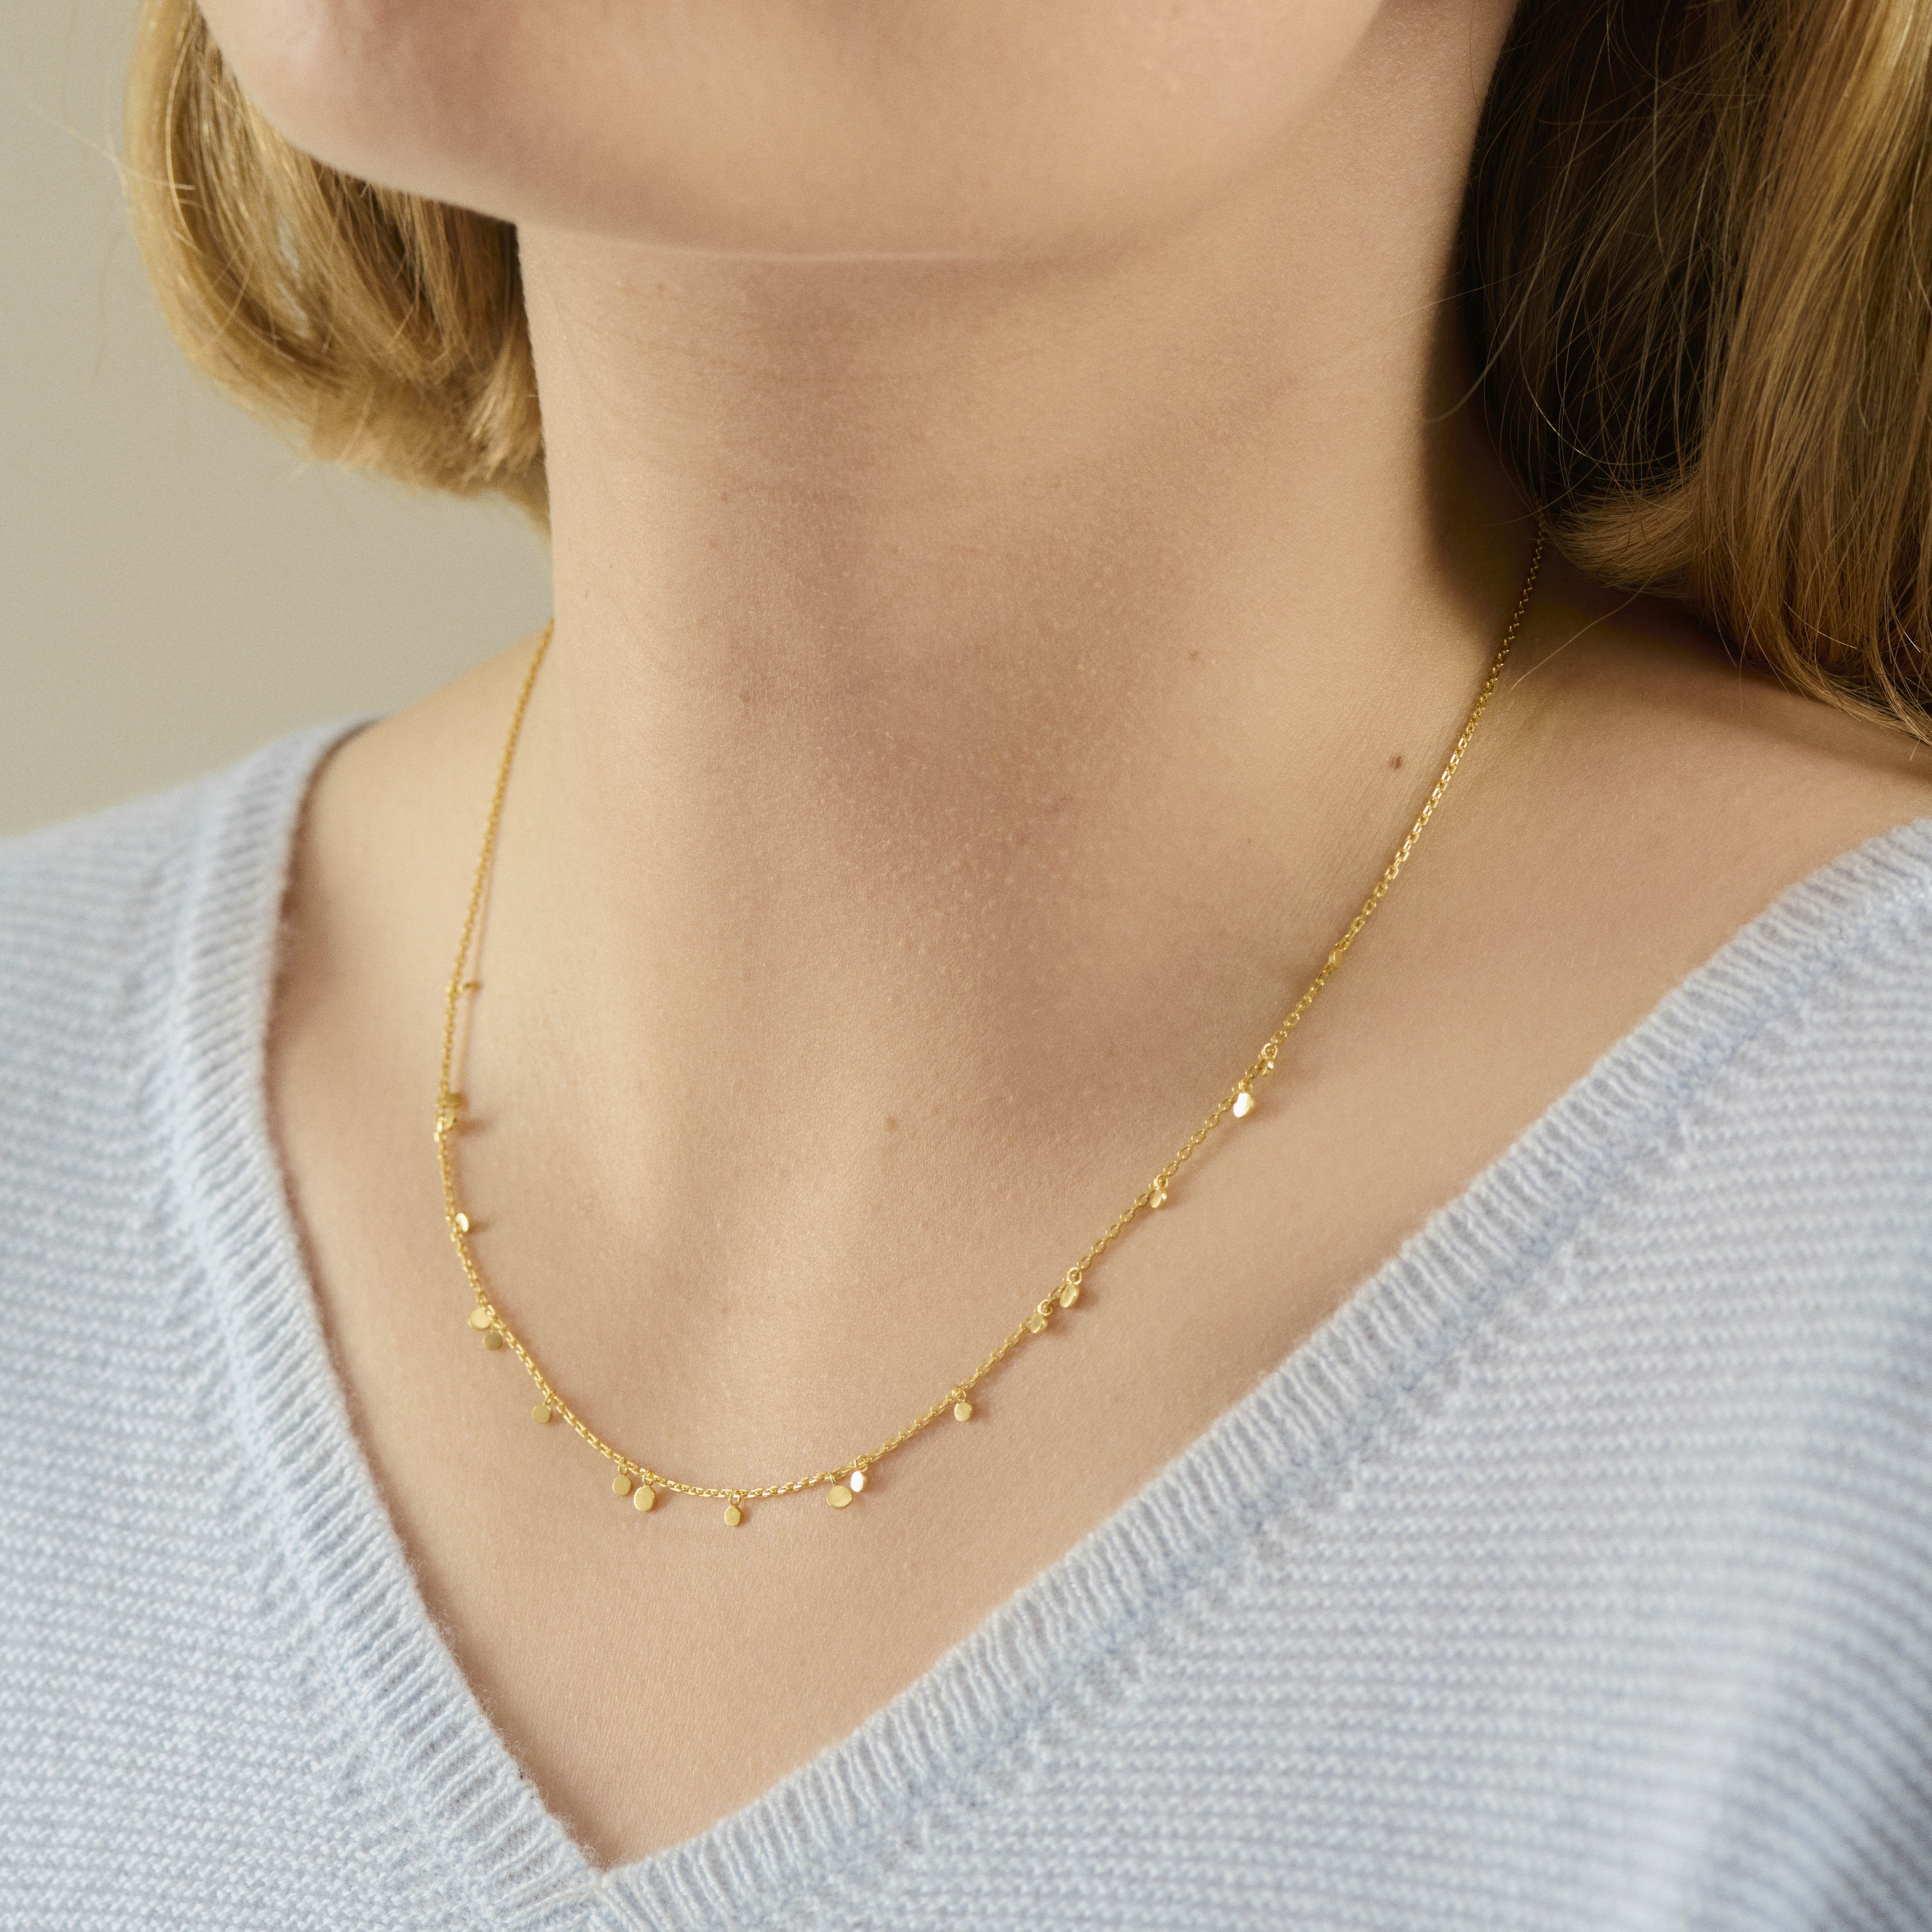 Glow Necklace from Pernille Corydon in Goldplated-Silver Sterling 925